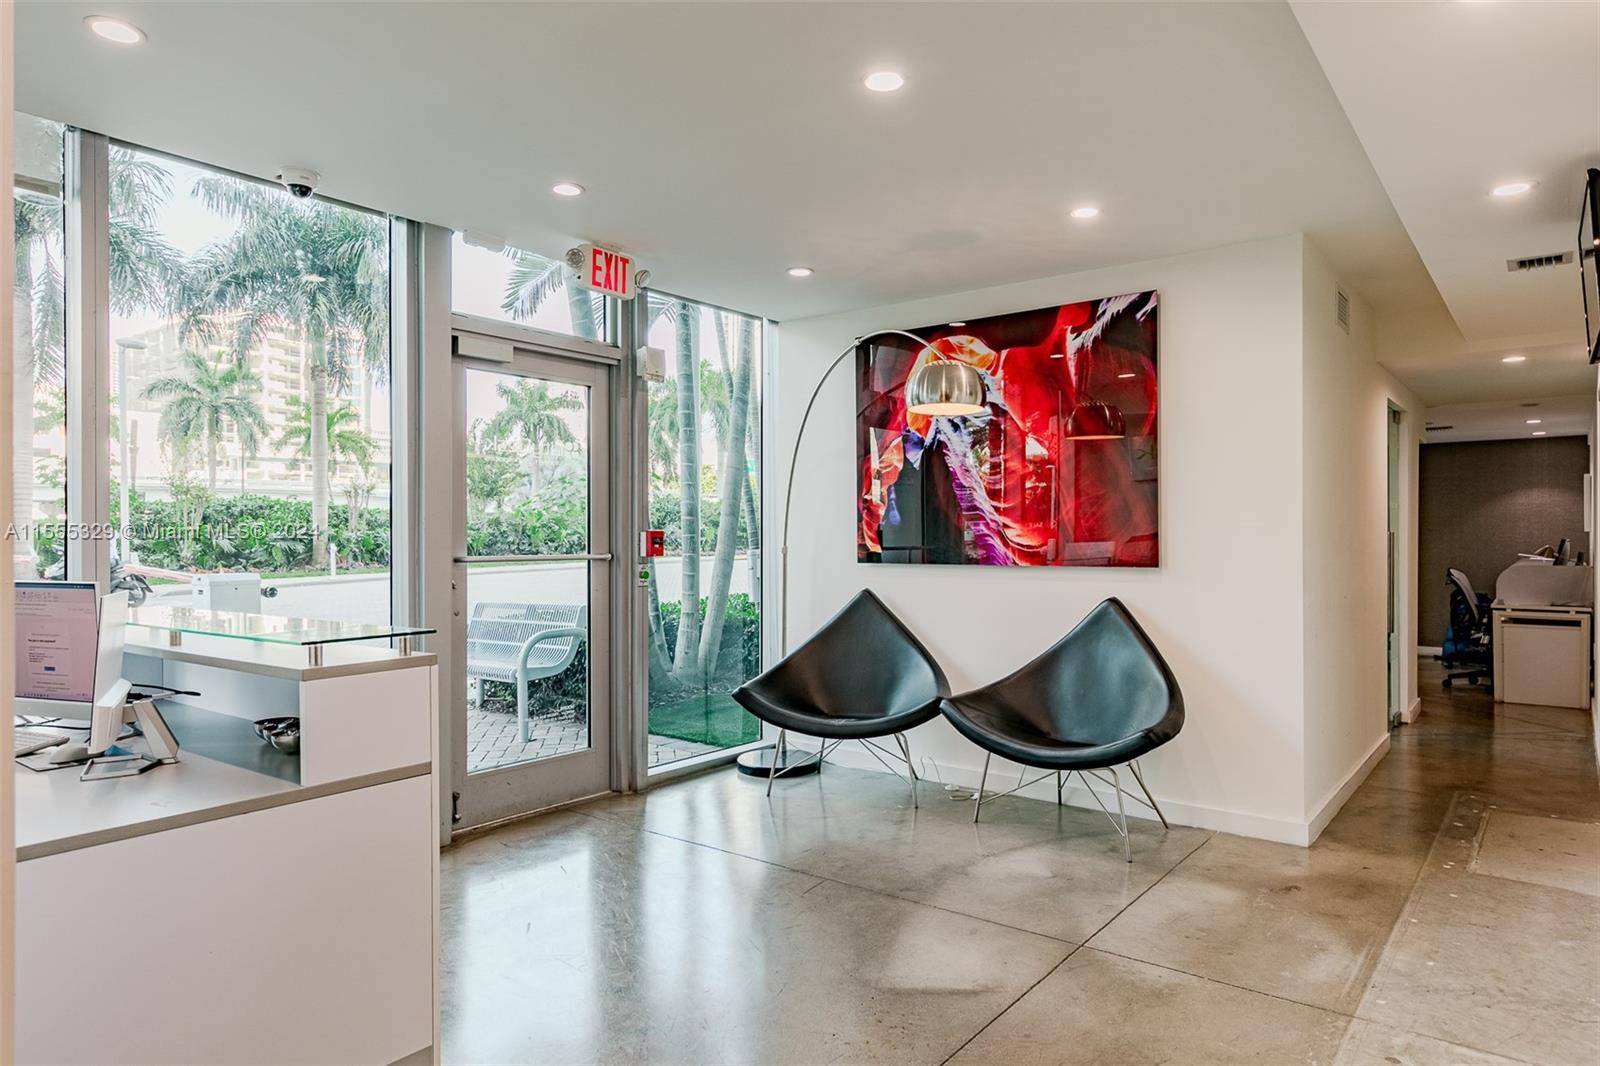 Owning retail space here means being situated in one of Miami's most prestigious and desirable areas, attracting both local residents and tourists.